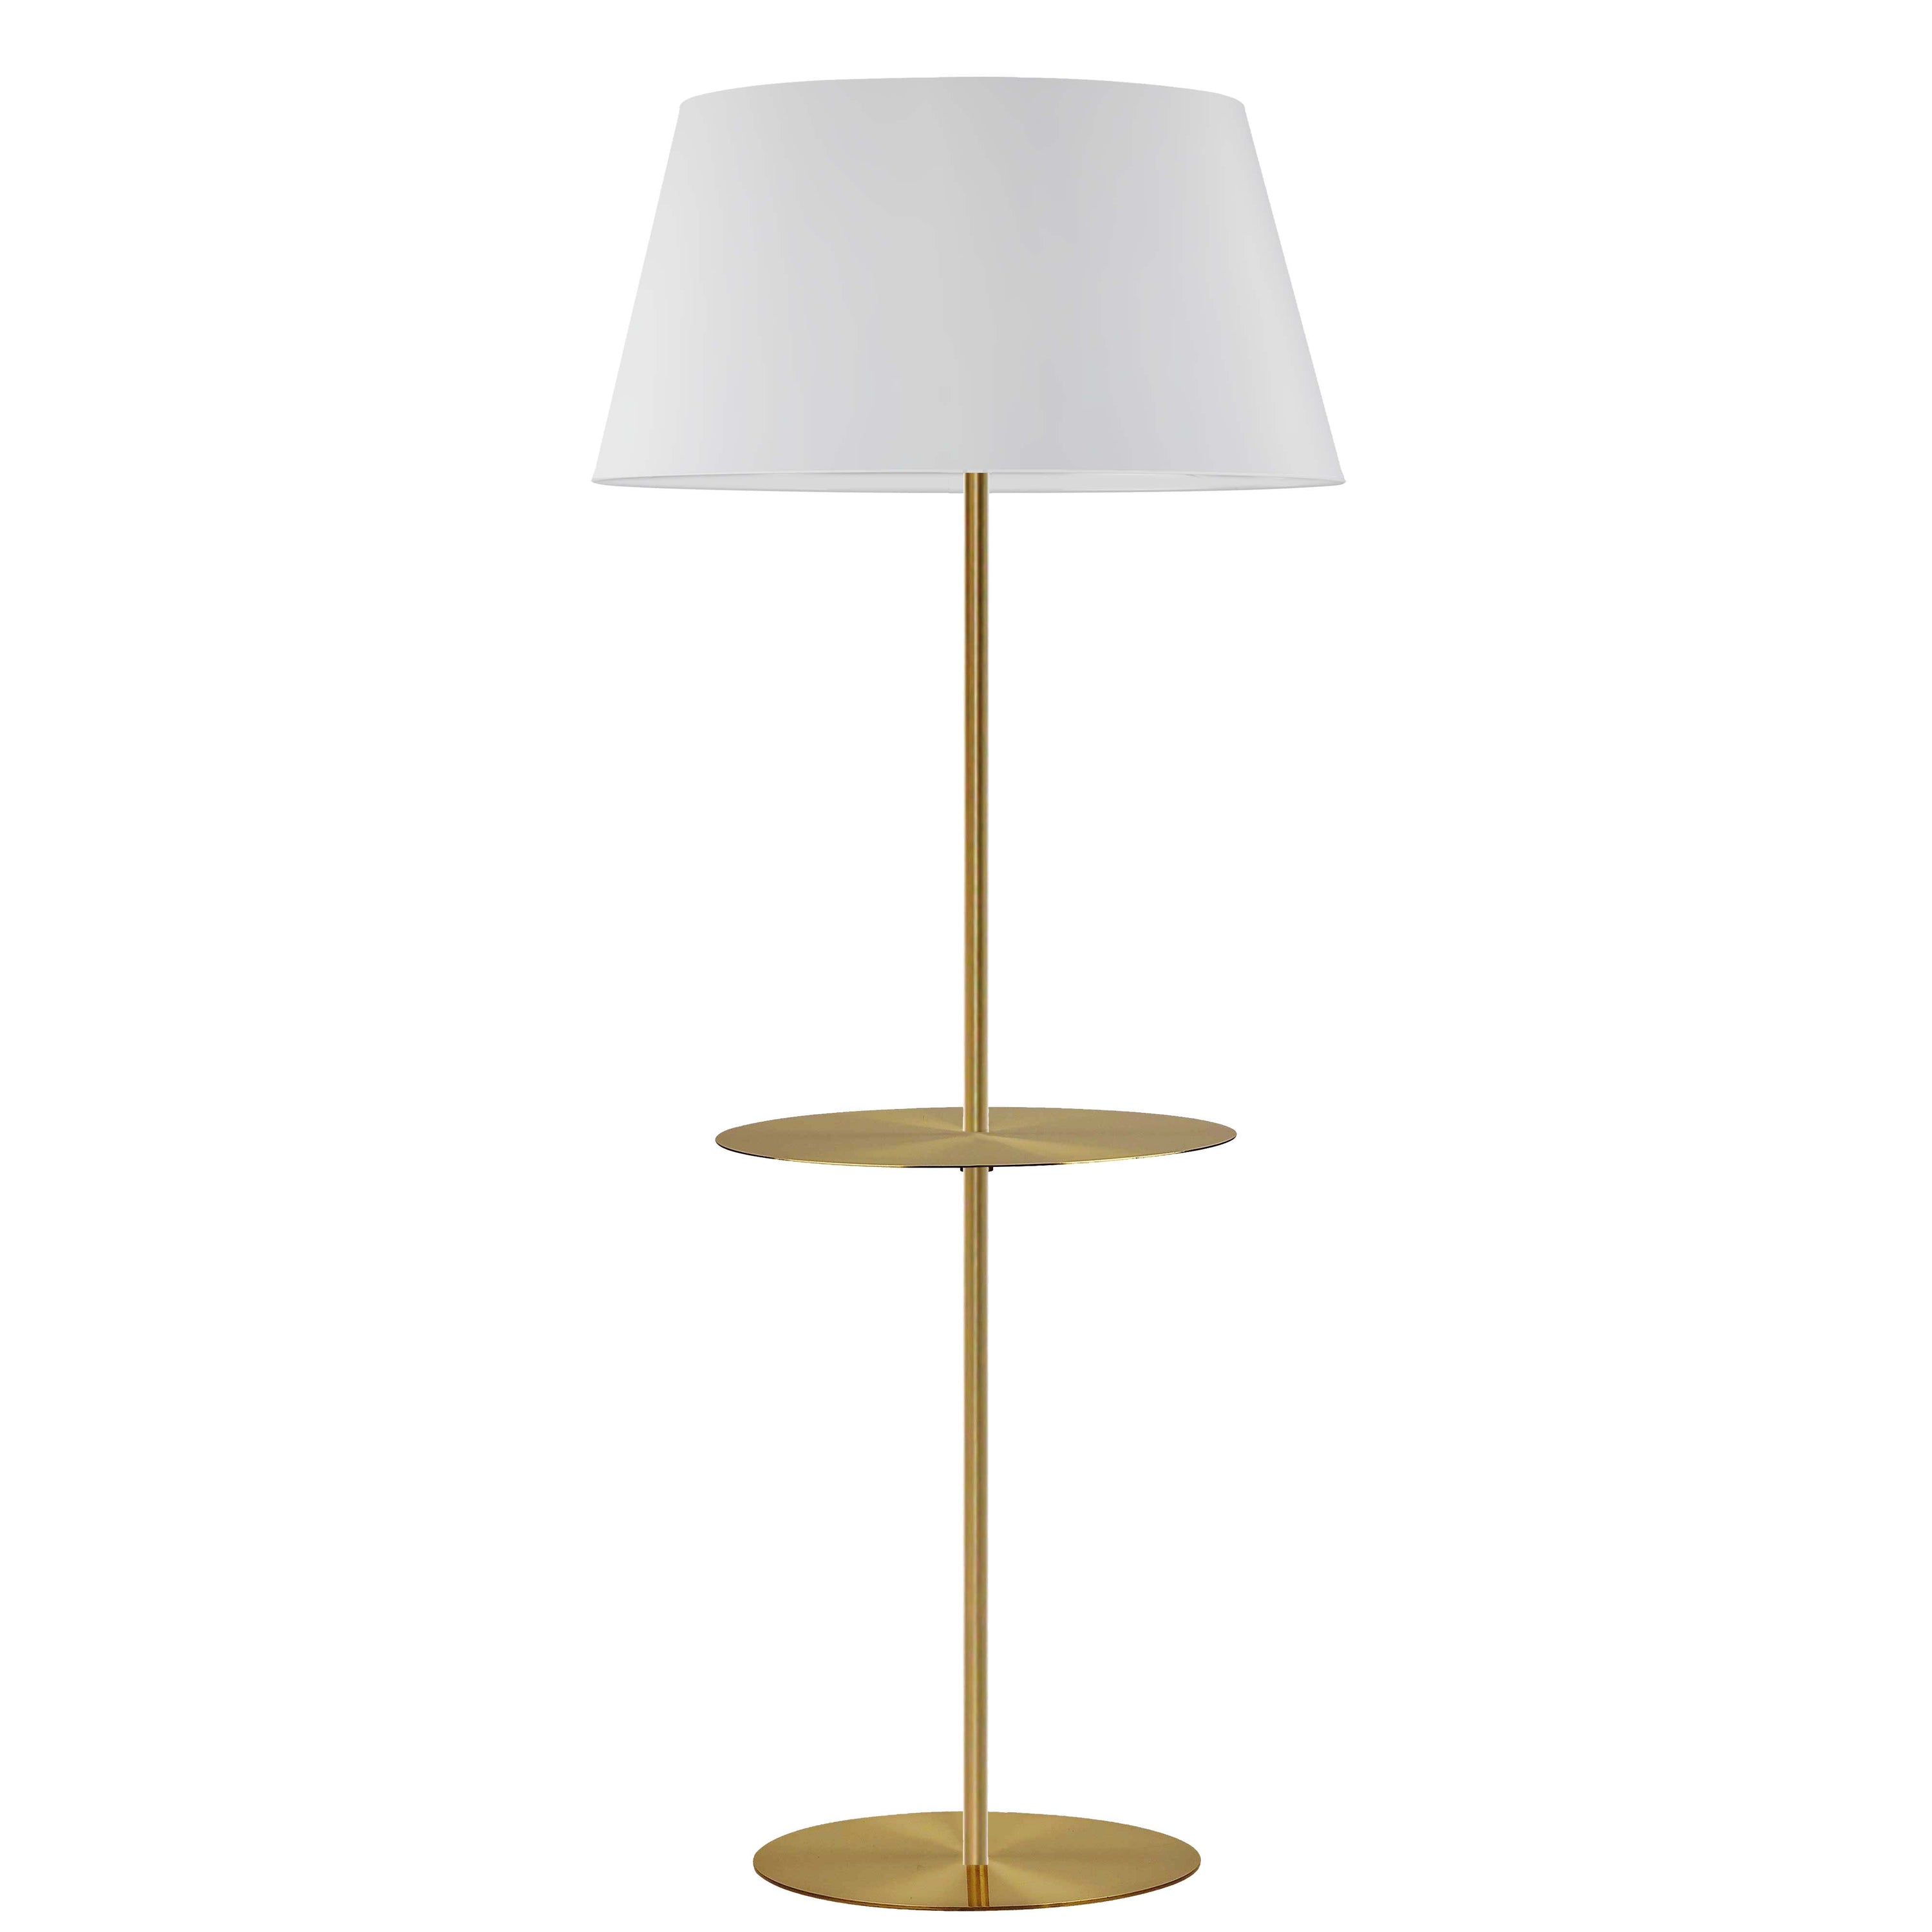 Dainolite GTC-R641F-AGB-WH 1 Light Incandescent Round Base Floor with Shelf Aged Brass with White Shade